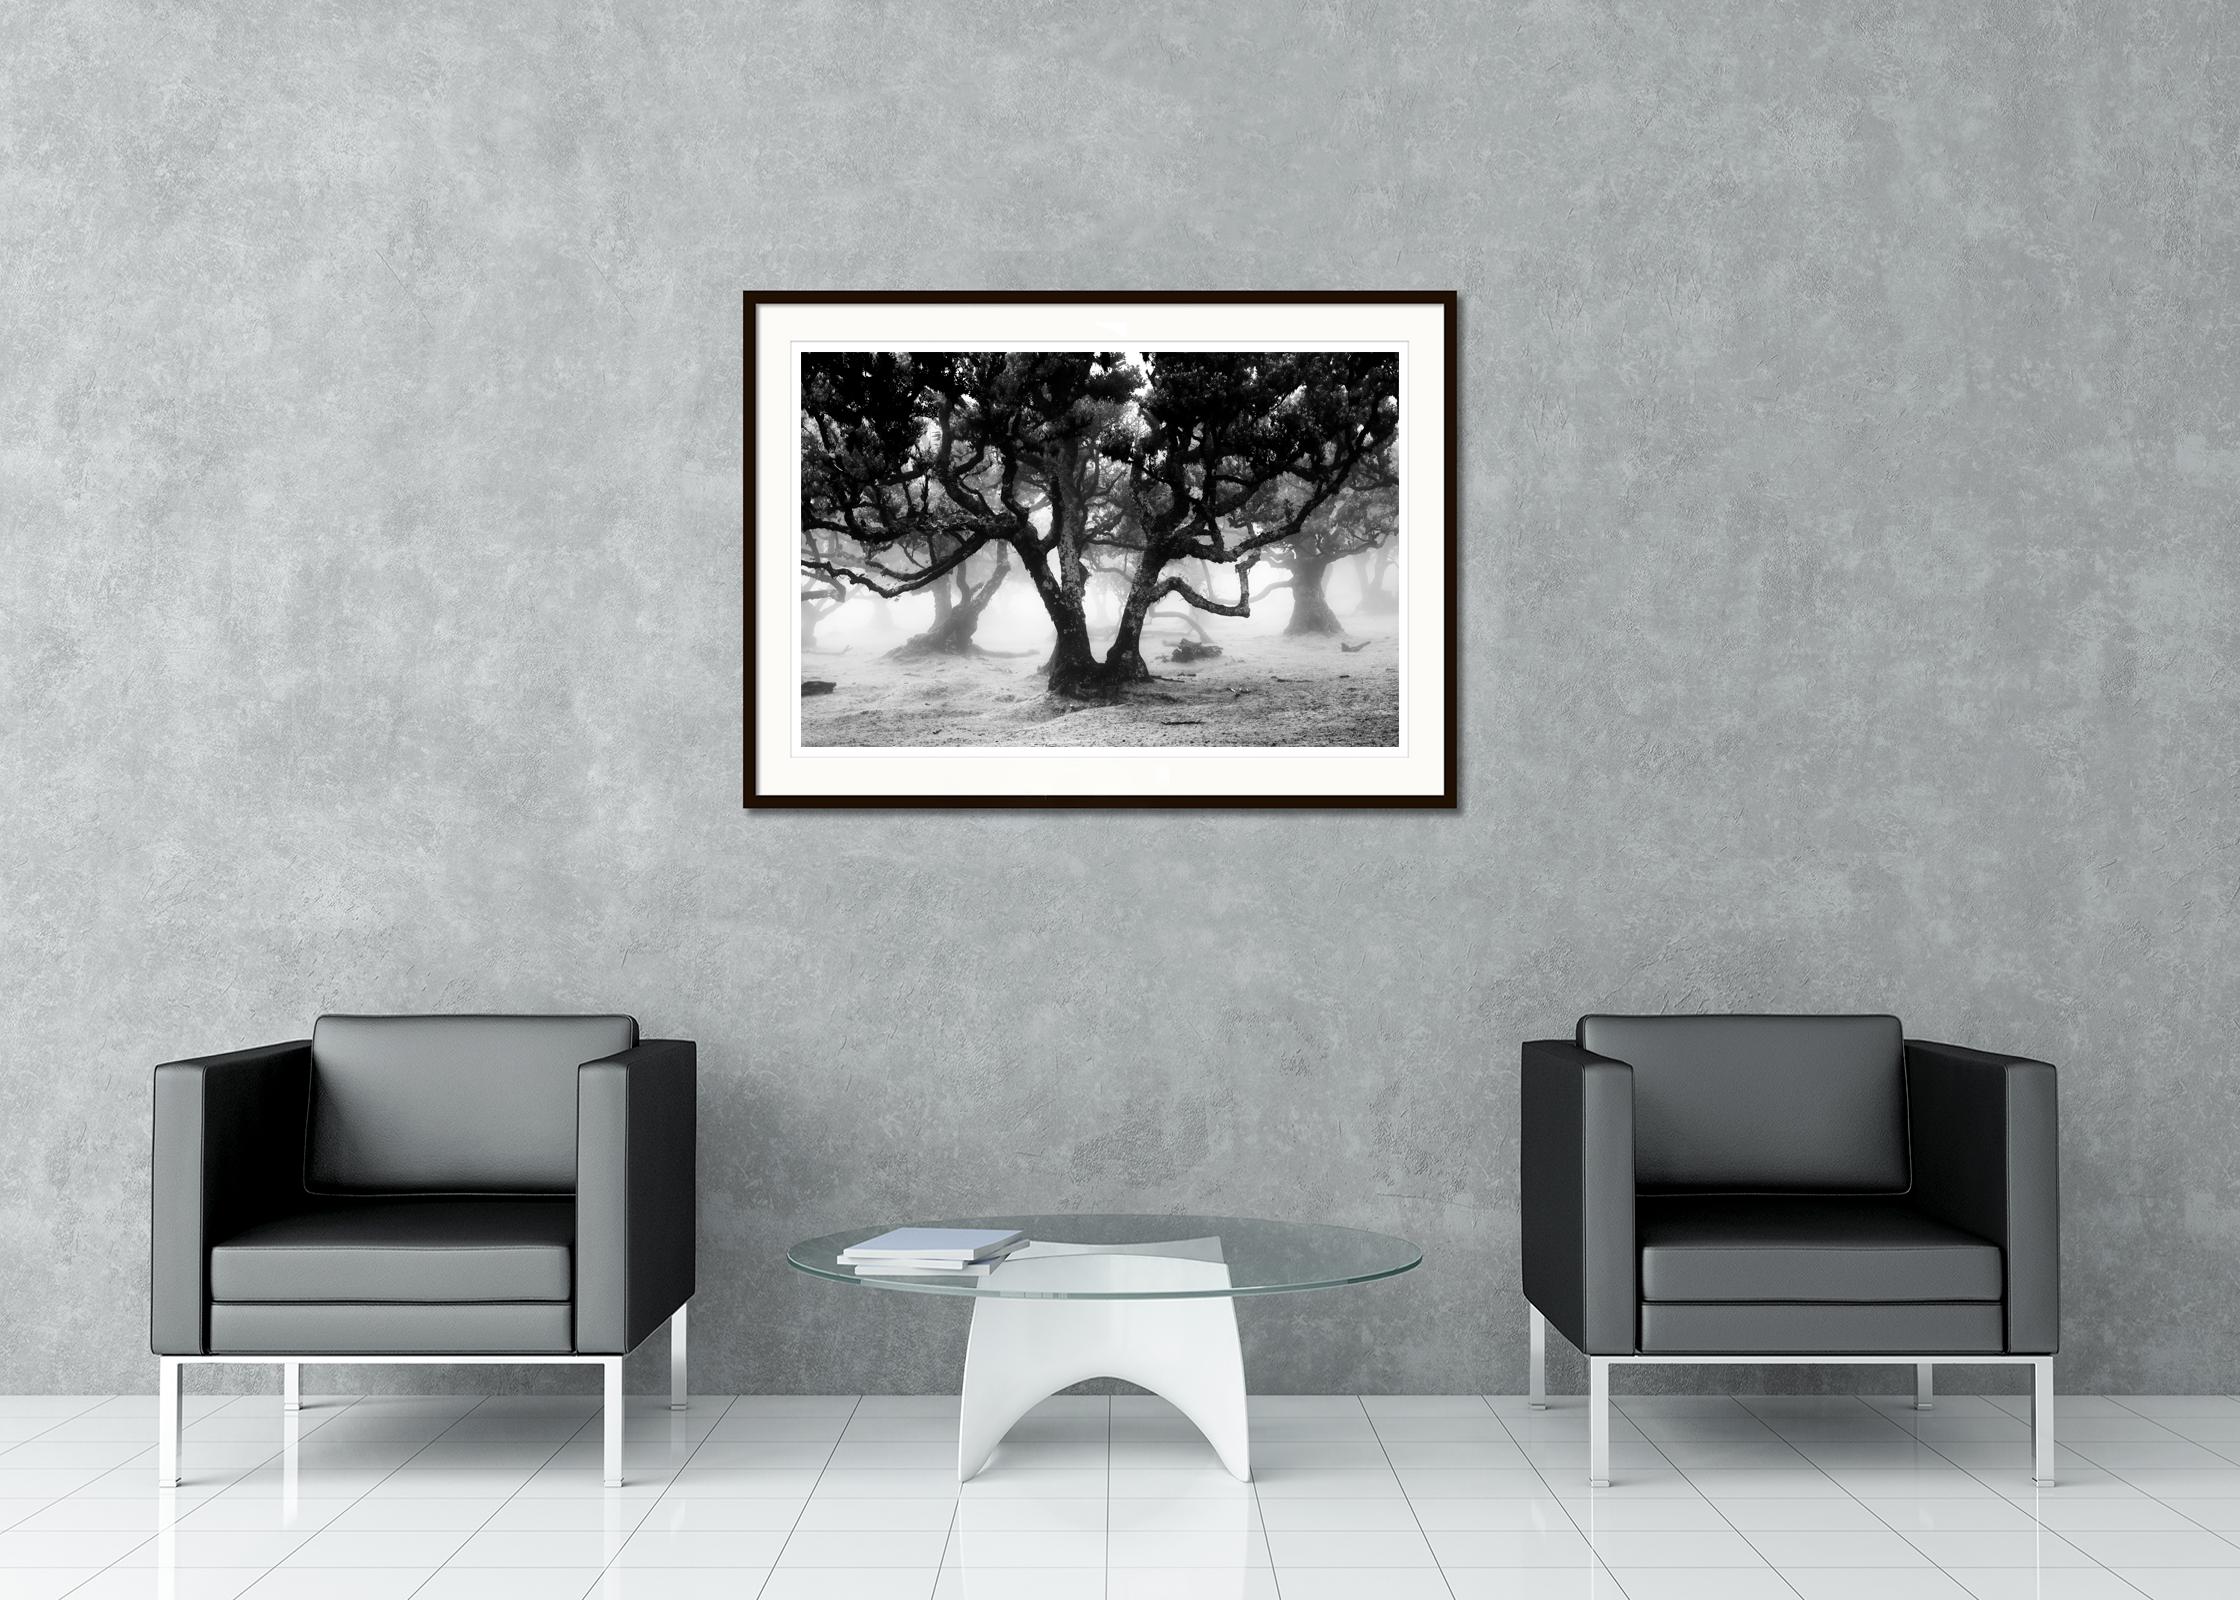 Black and white fine art landscape photography. Archival pigment ink print as part of a limited edition of 5. All Gerald Berghammer prints are made to order in limited editions on Hahnemuehle Photo Rag Baryta. Each print is stamped on the back and